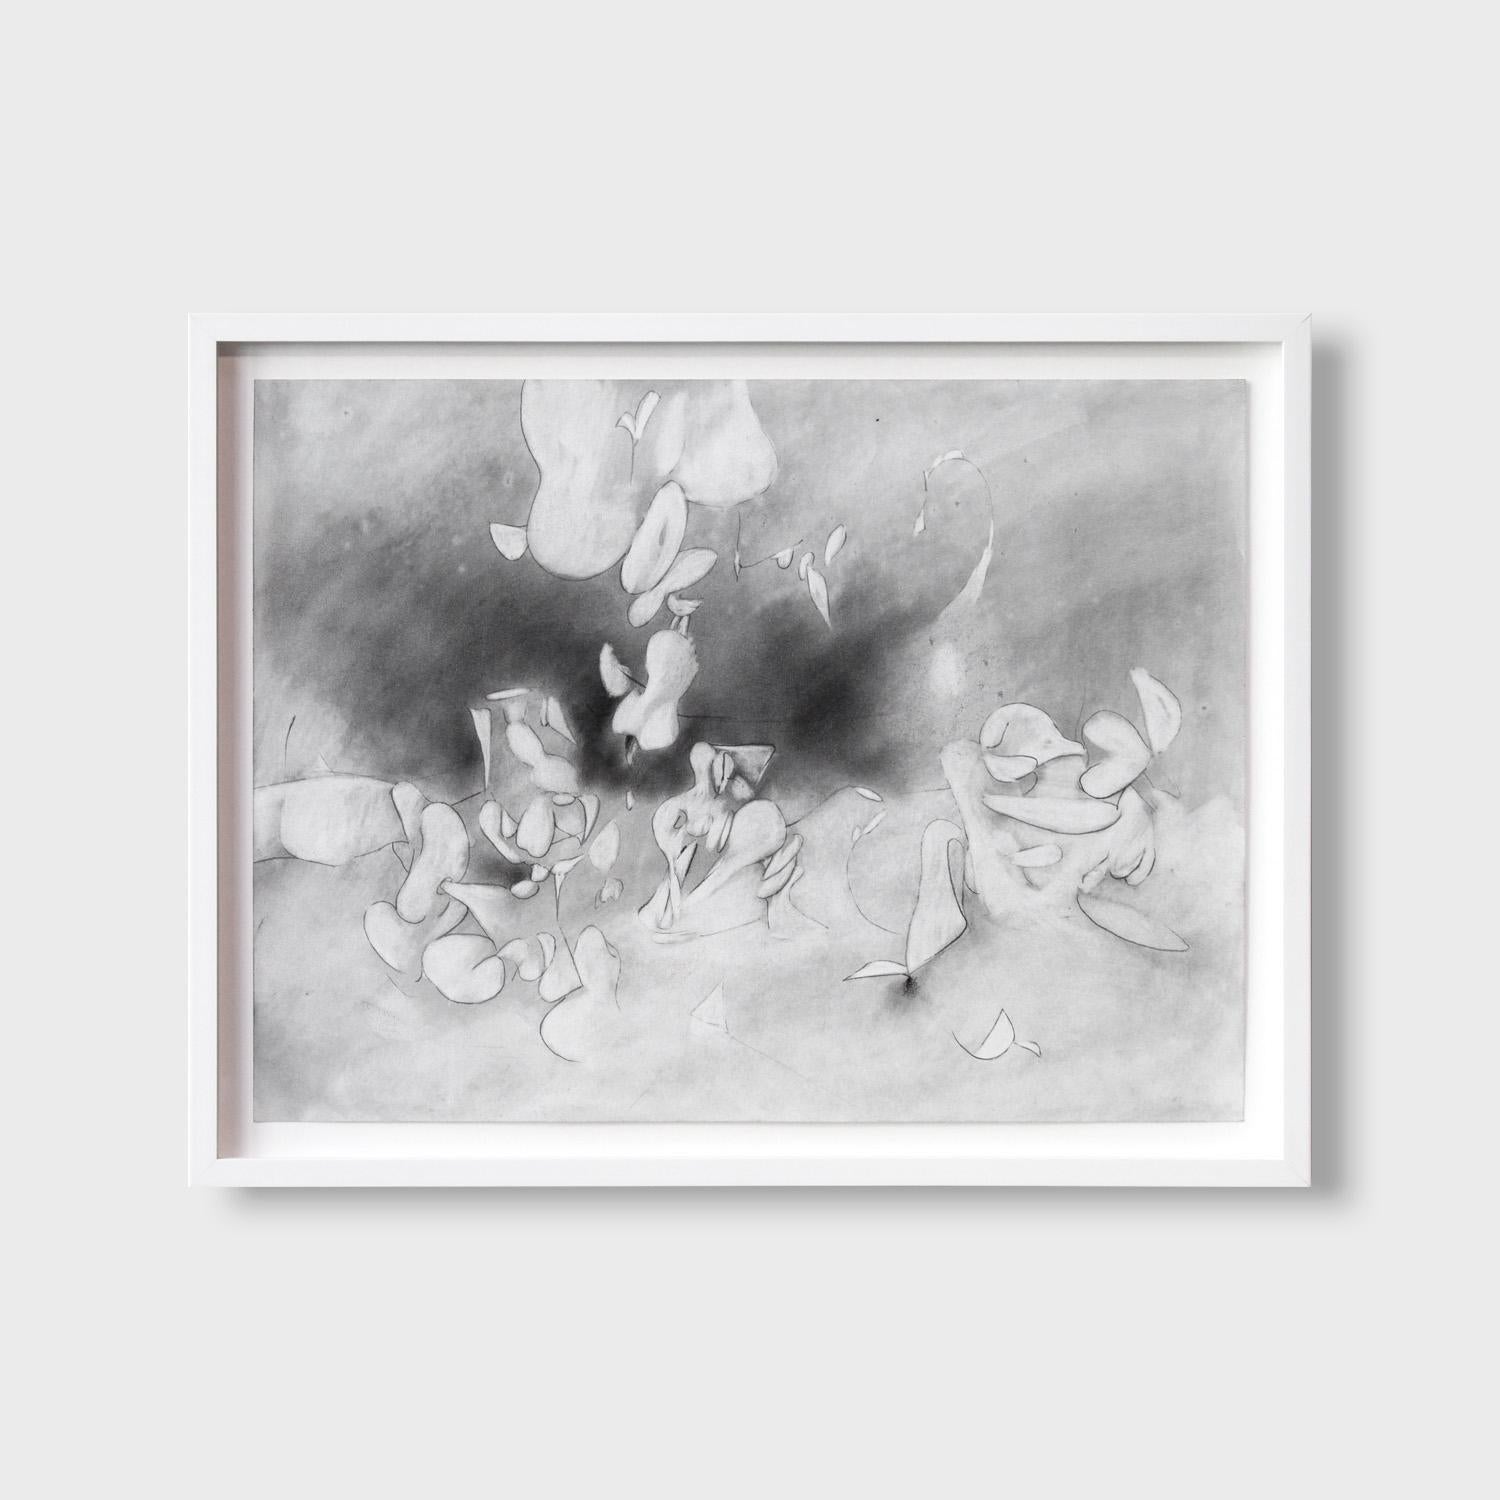 This is a one of a kind original abstract graphite drawing on paper by Southern California artist, Daniel Ketelhut. Its dimensions are 24